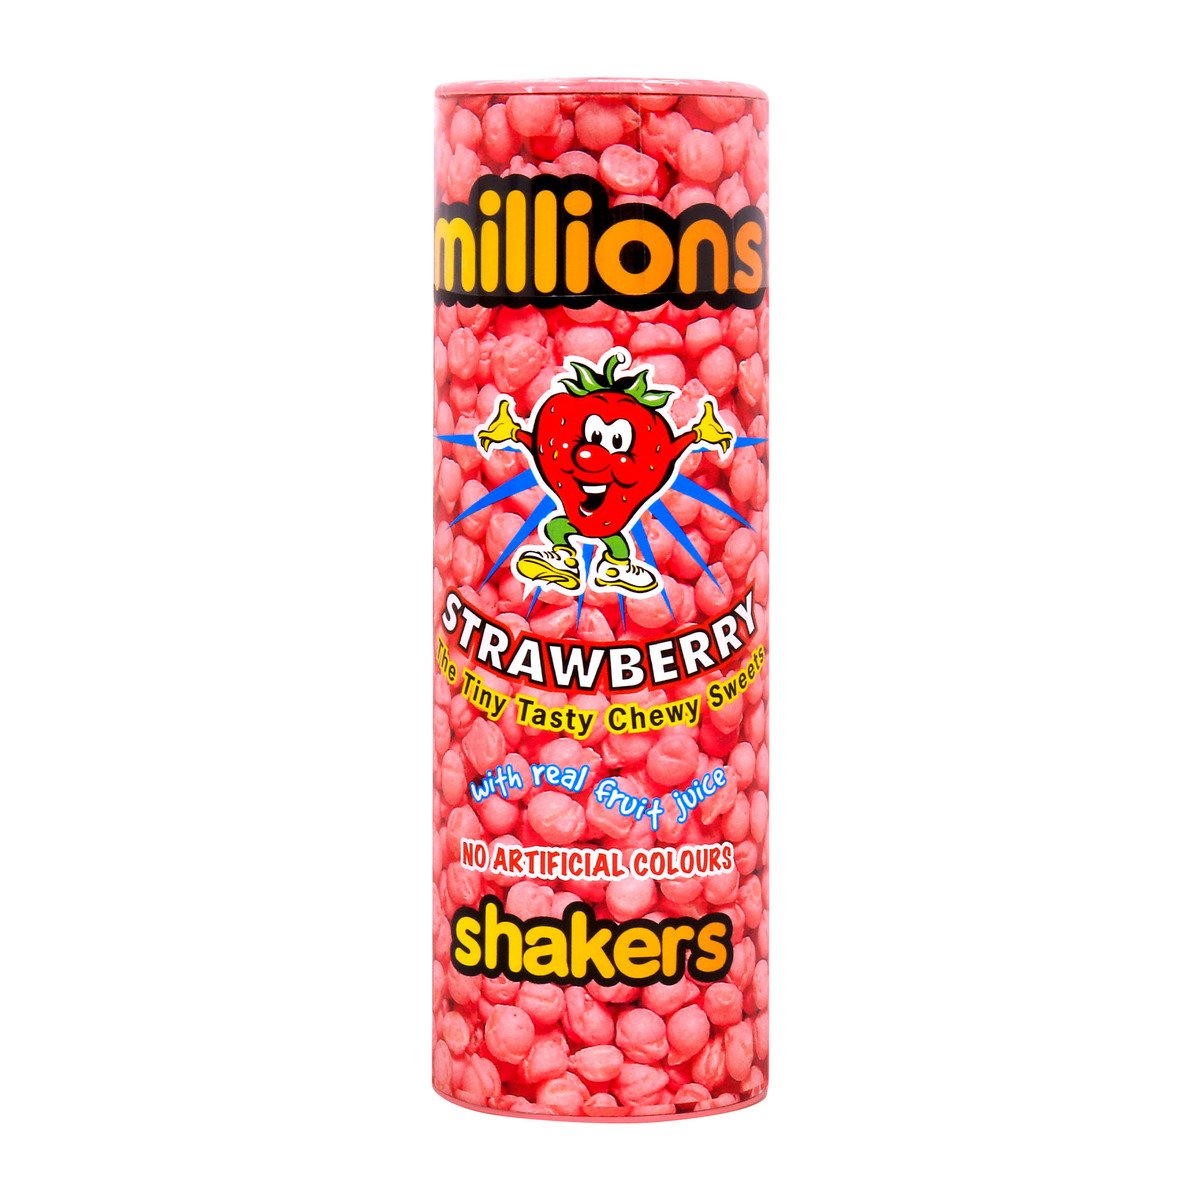 Millions Strawberry Shakers 90g